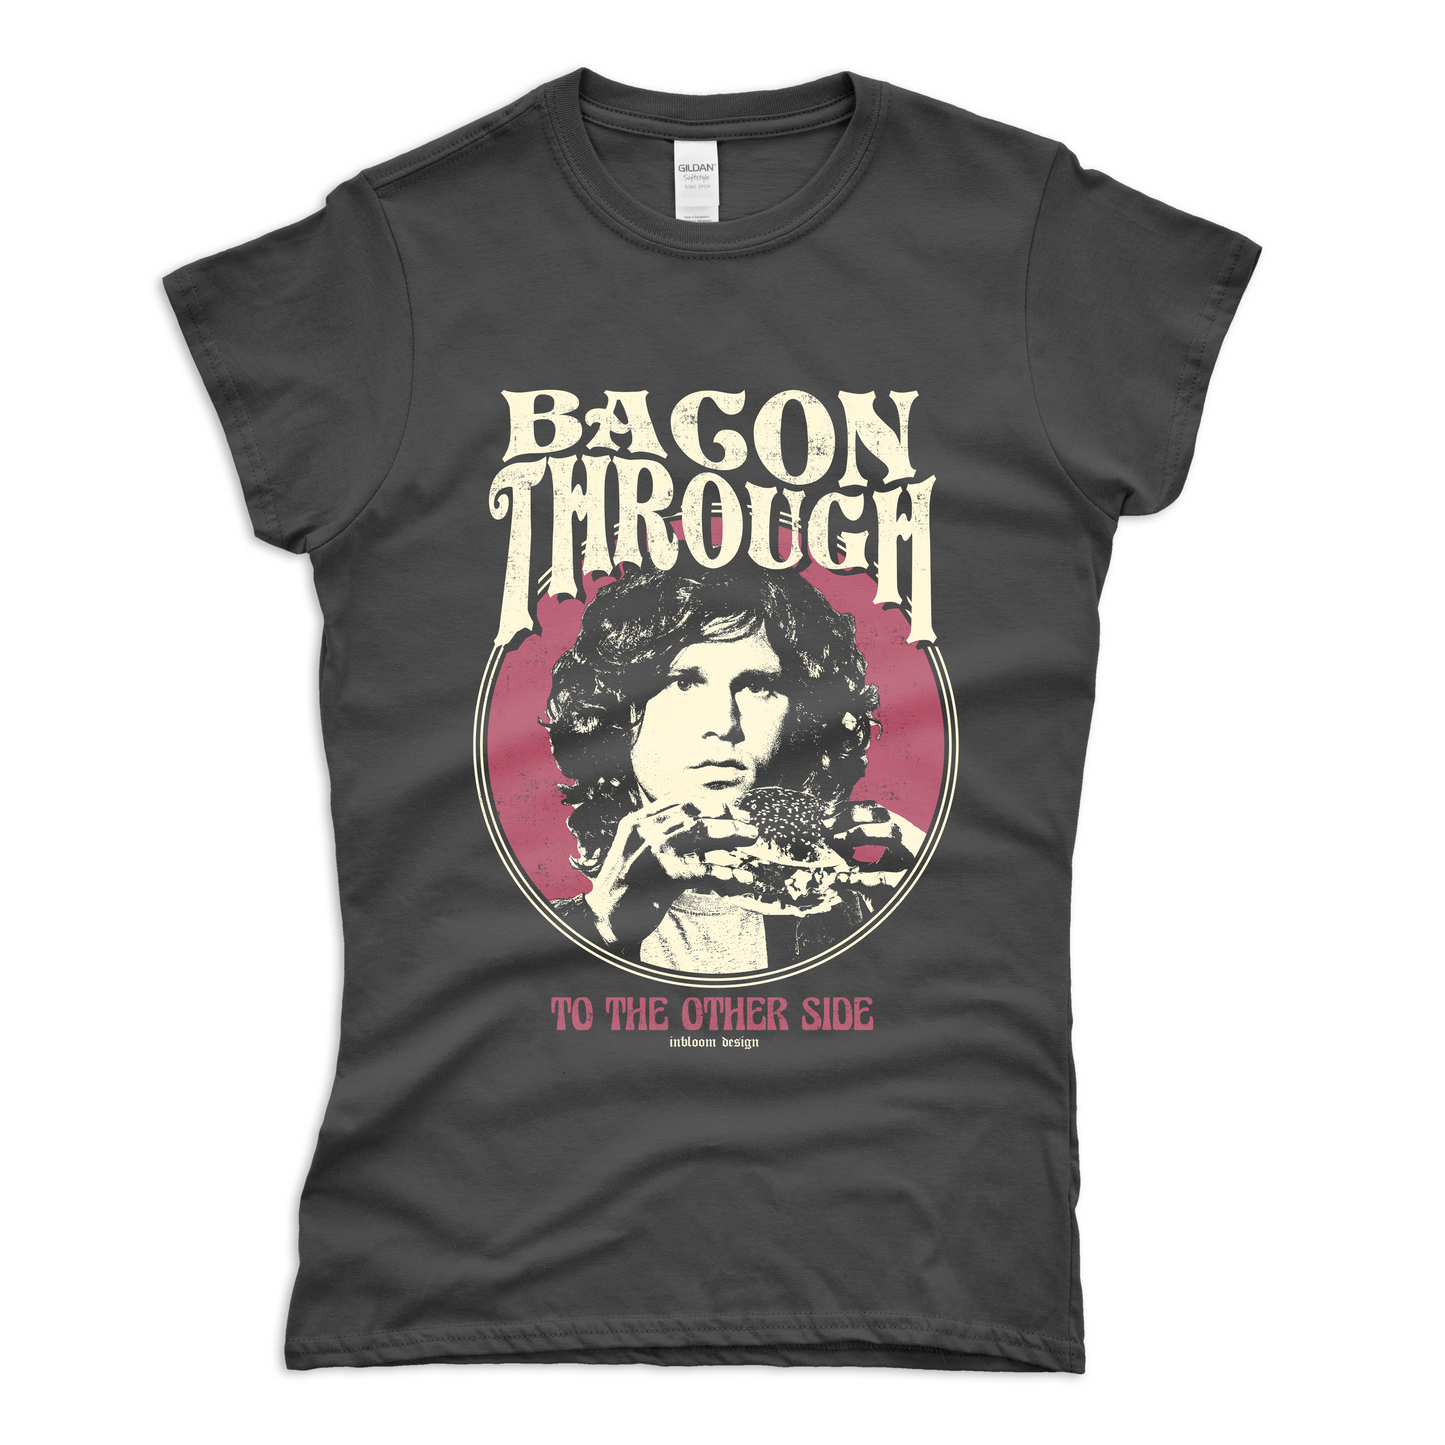 BACON THROUGH, TO THE OTHER SIDE - Alex Inbloom Chica / S Camisas y tops